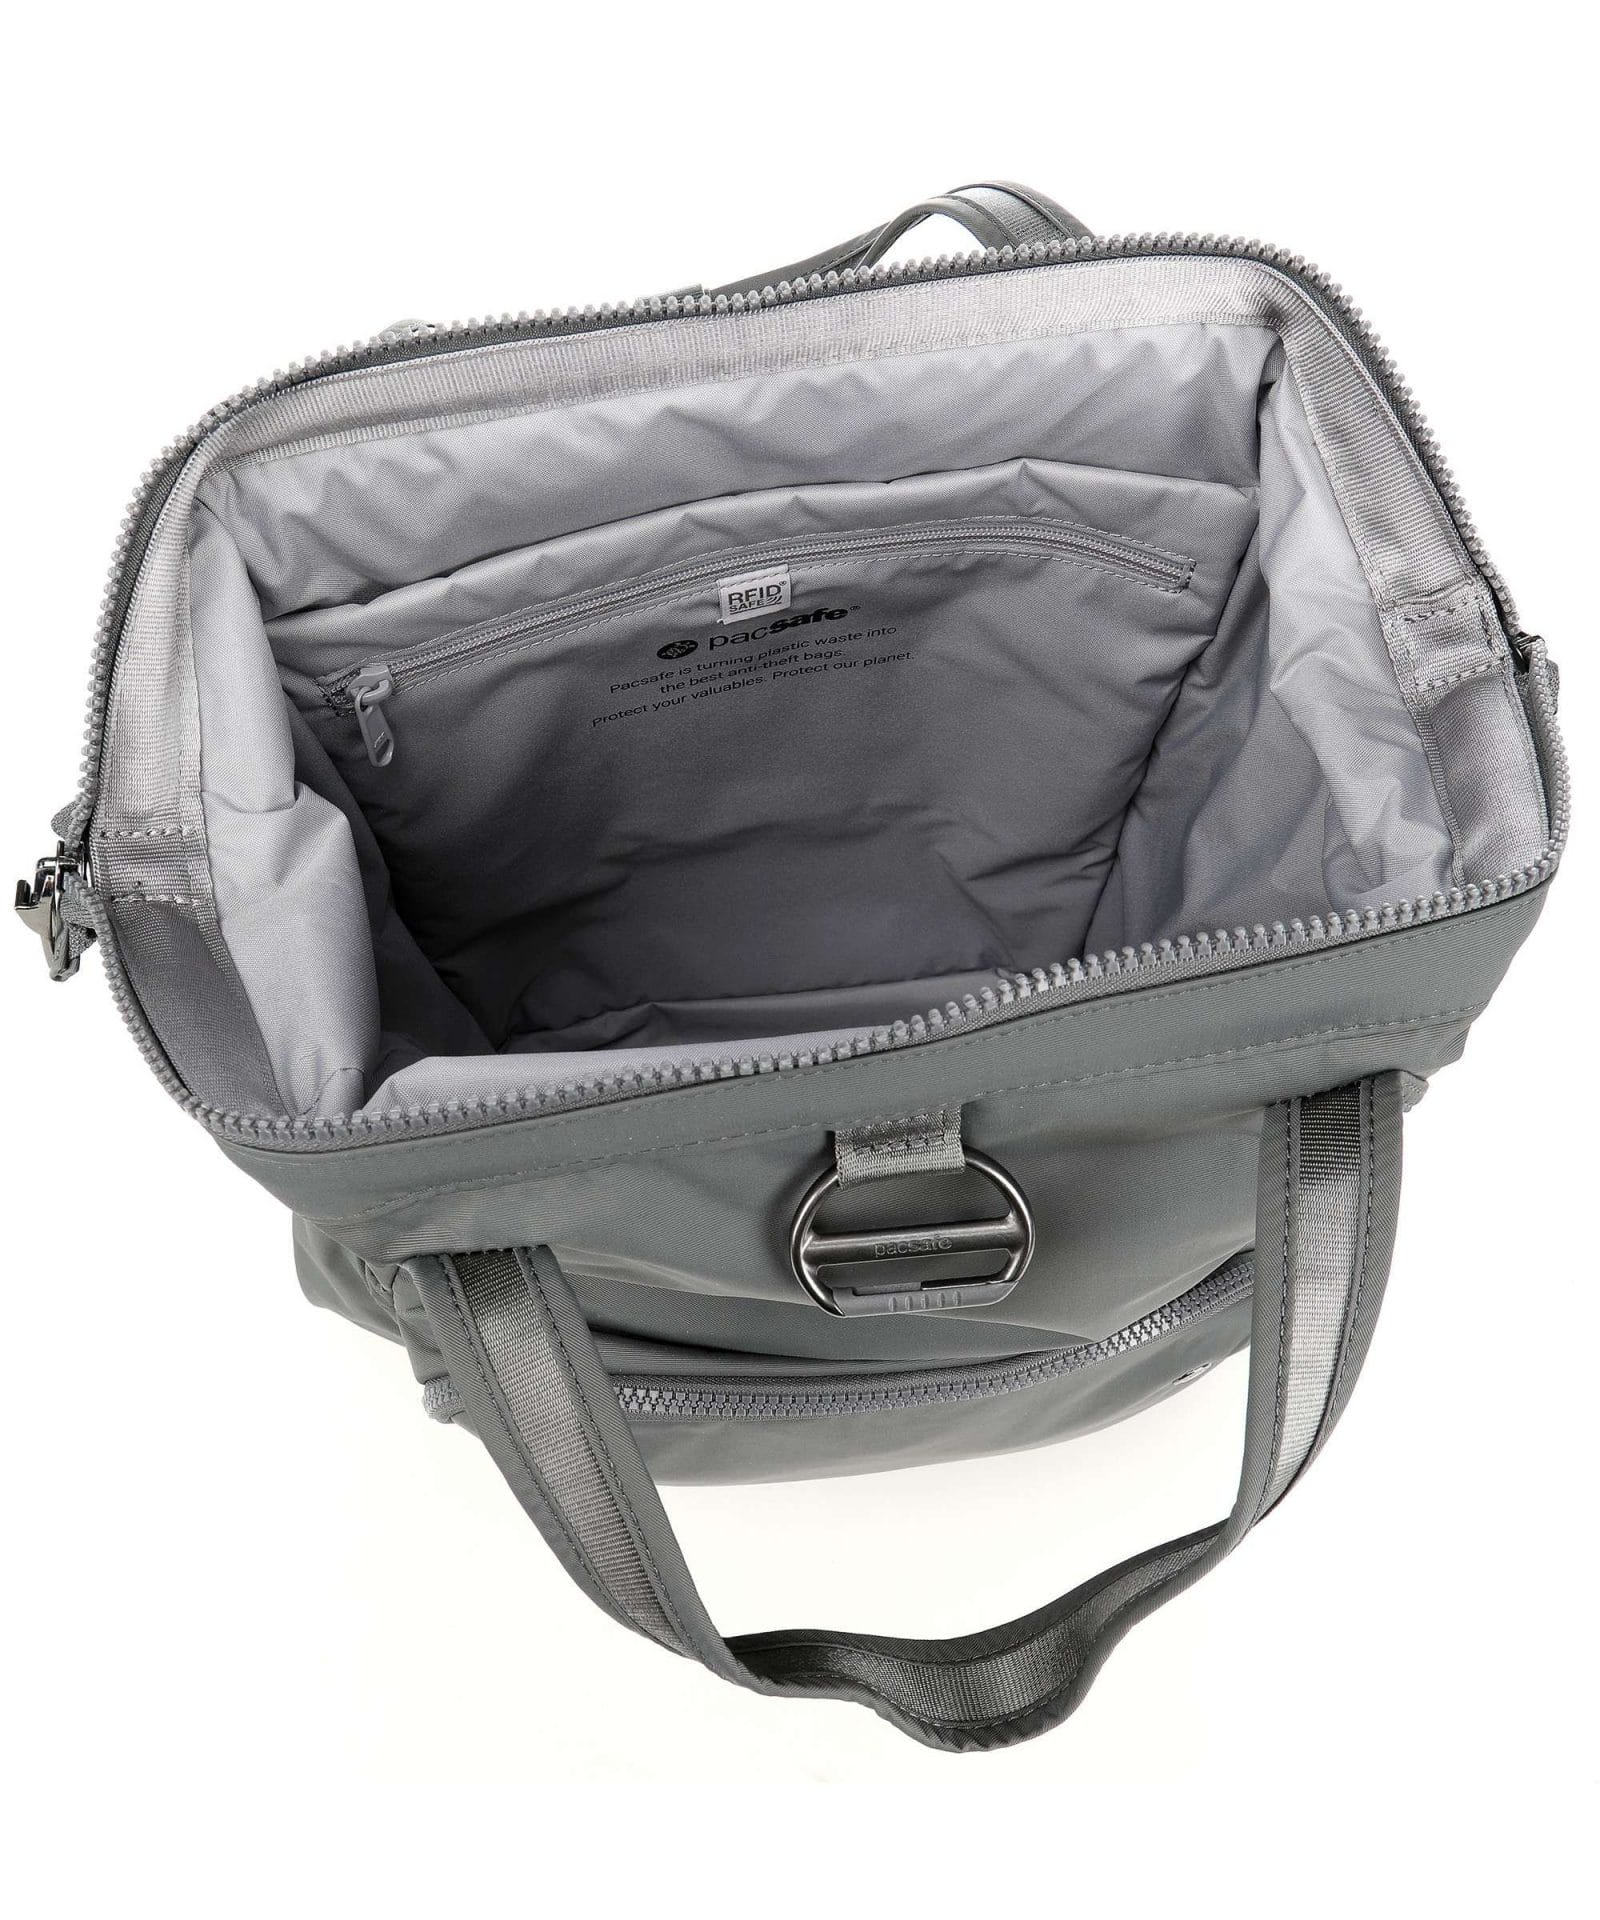 Stylish + Secure: The Citysafe CX Anti-Theft Backpack by Pacsafe